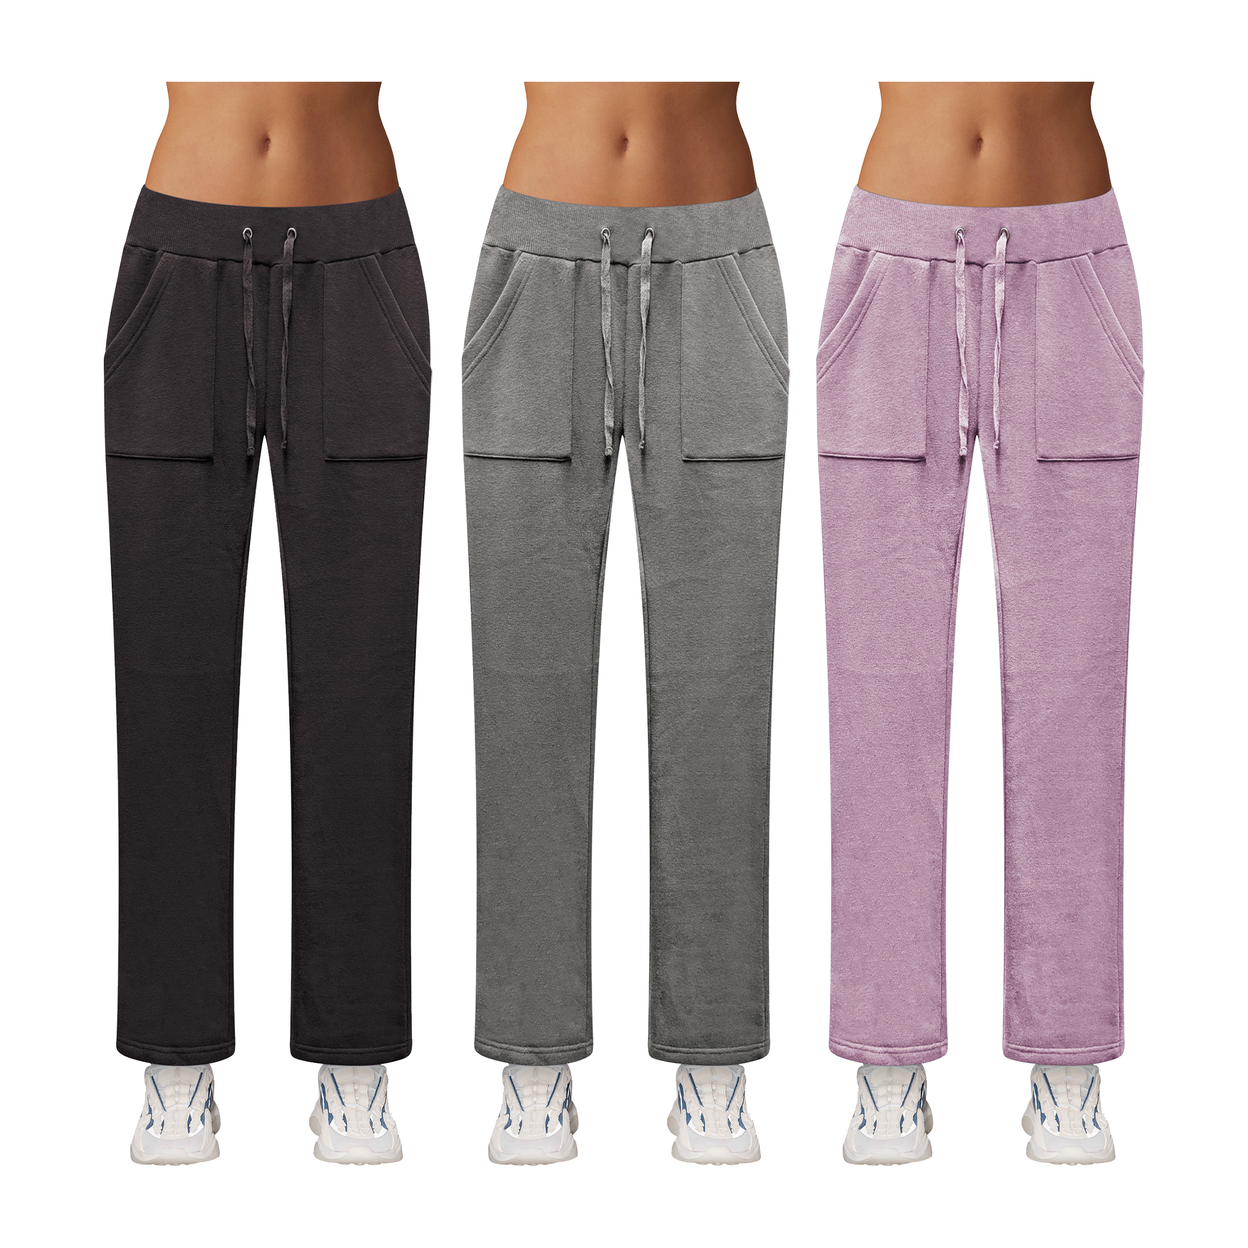 3-Pack: Women's Ultra-Soft Cozy Fleece Lined Elastic Waistband Terry Knit Pants - Large